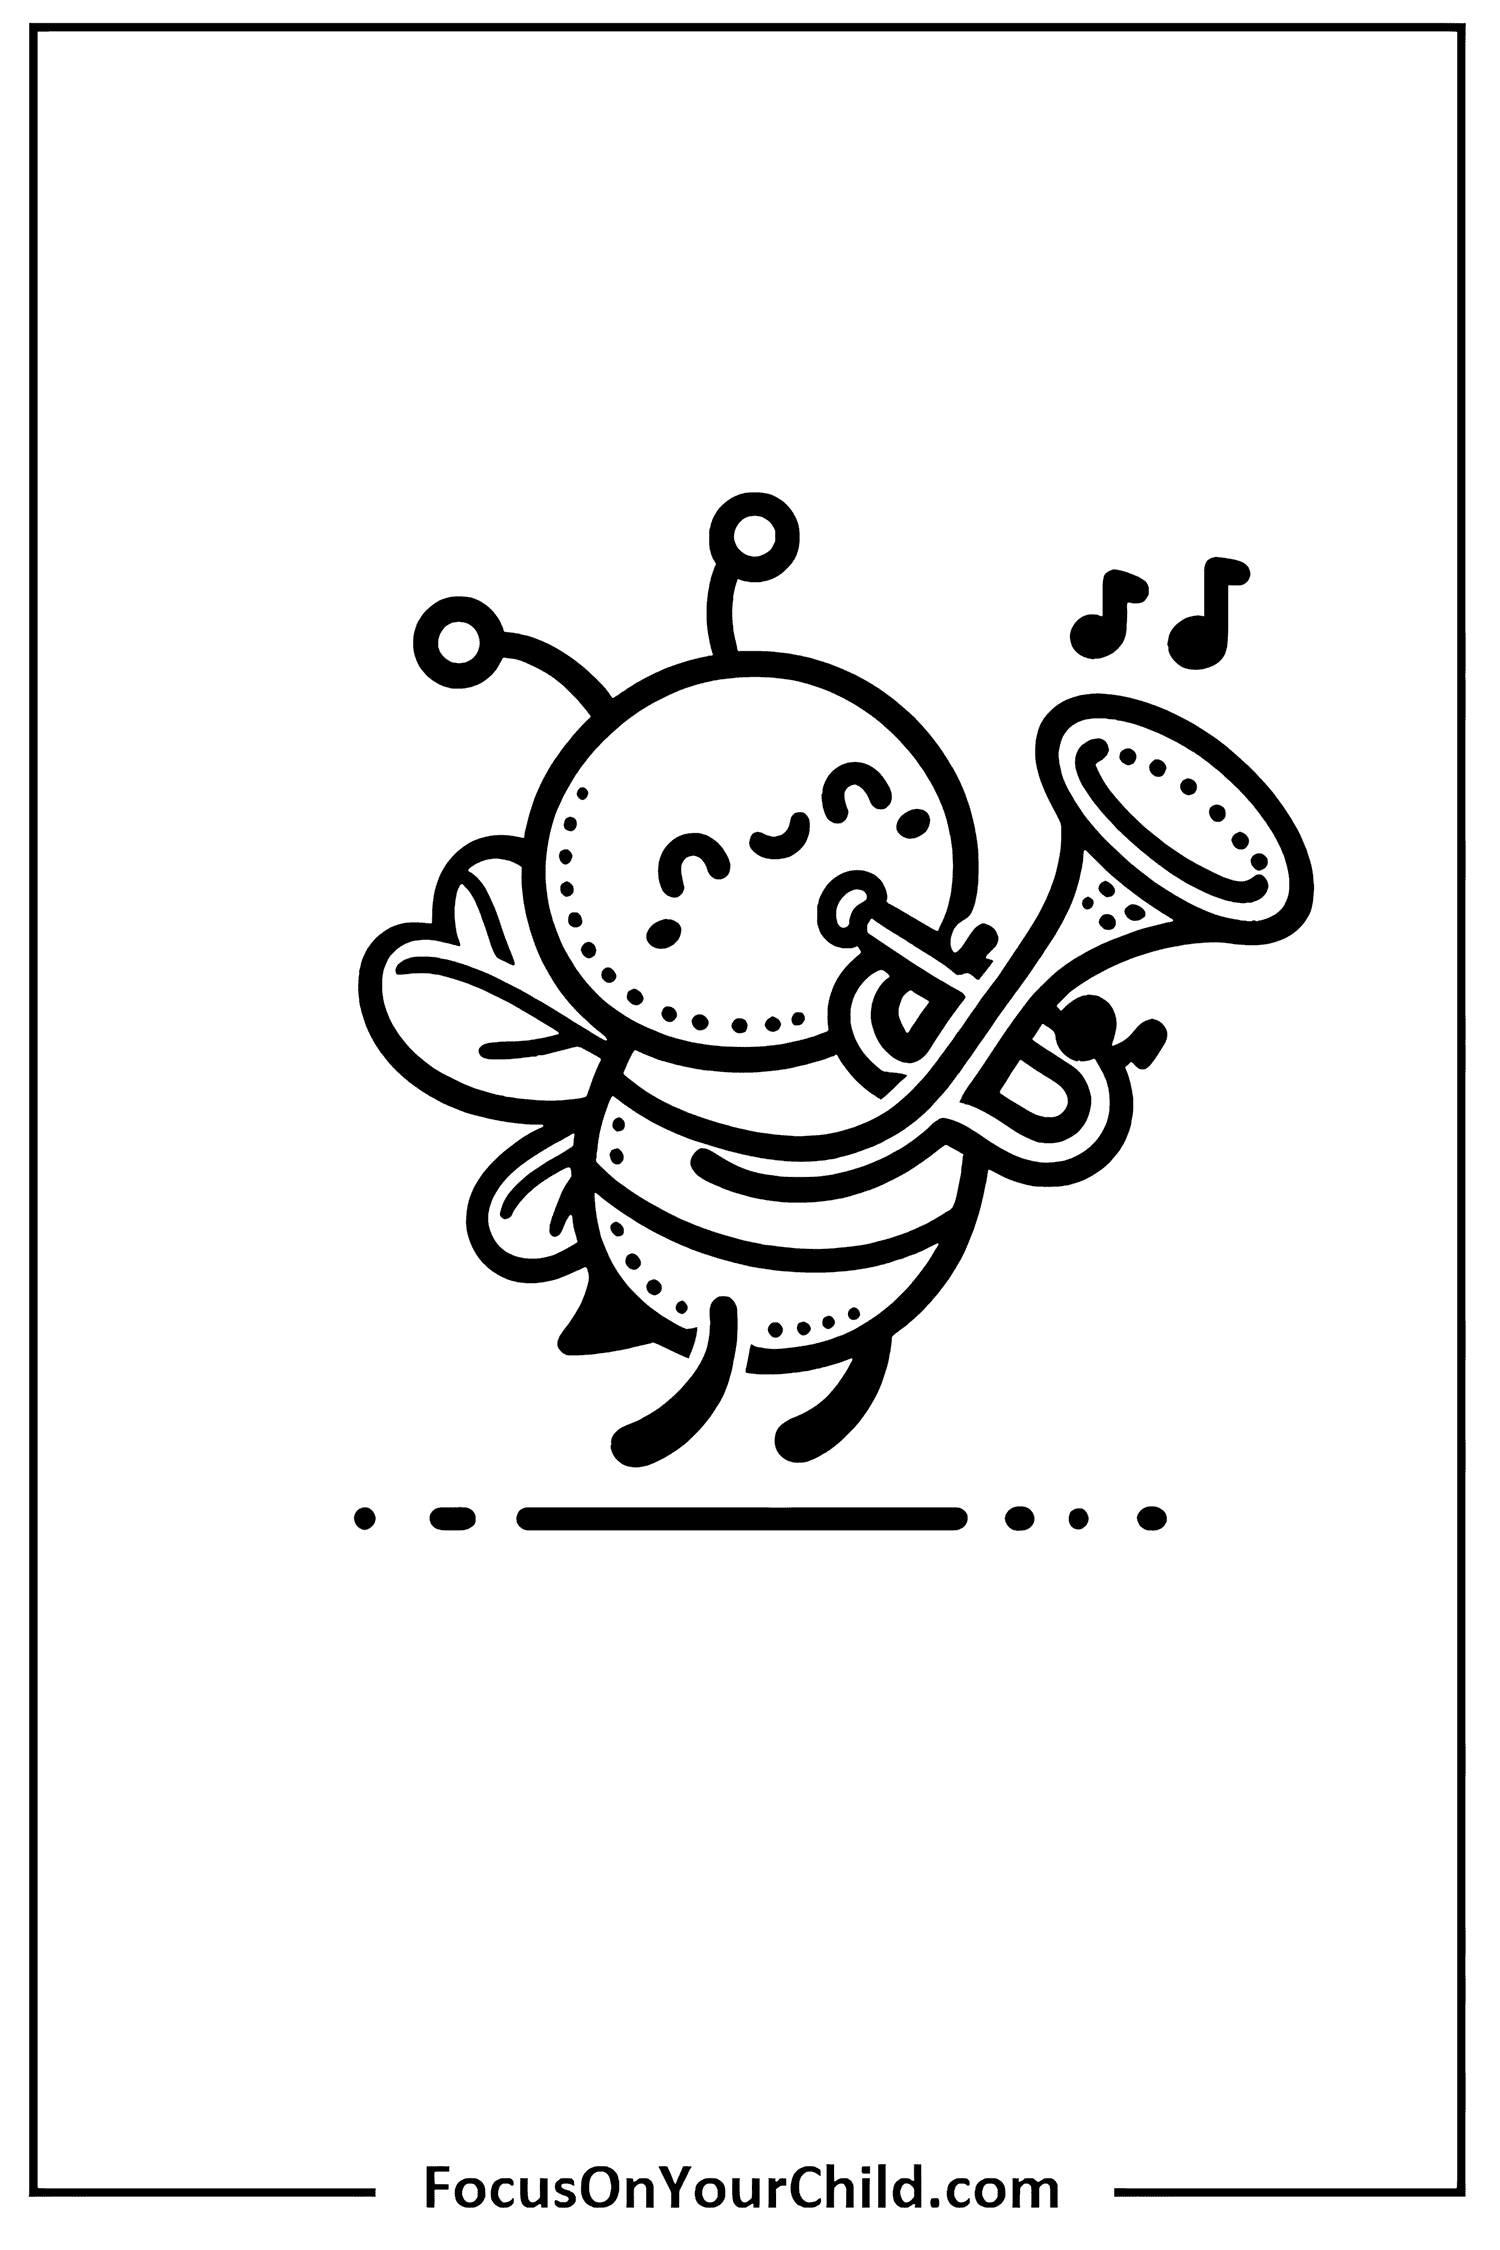 Whimsical bee playing trumpet in cartoon style for childrens educational website.